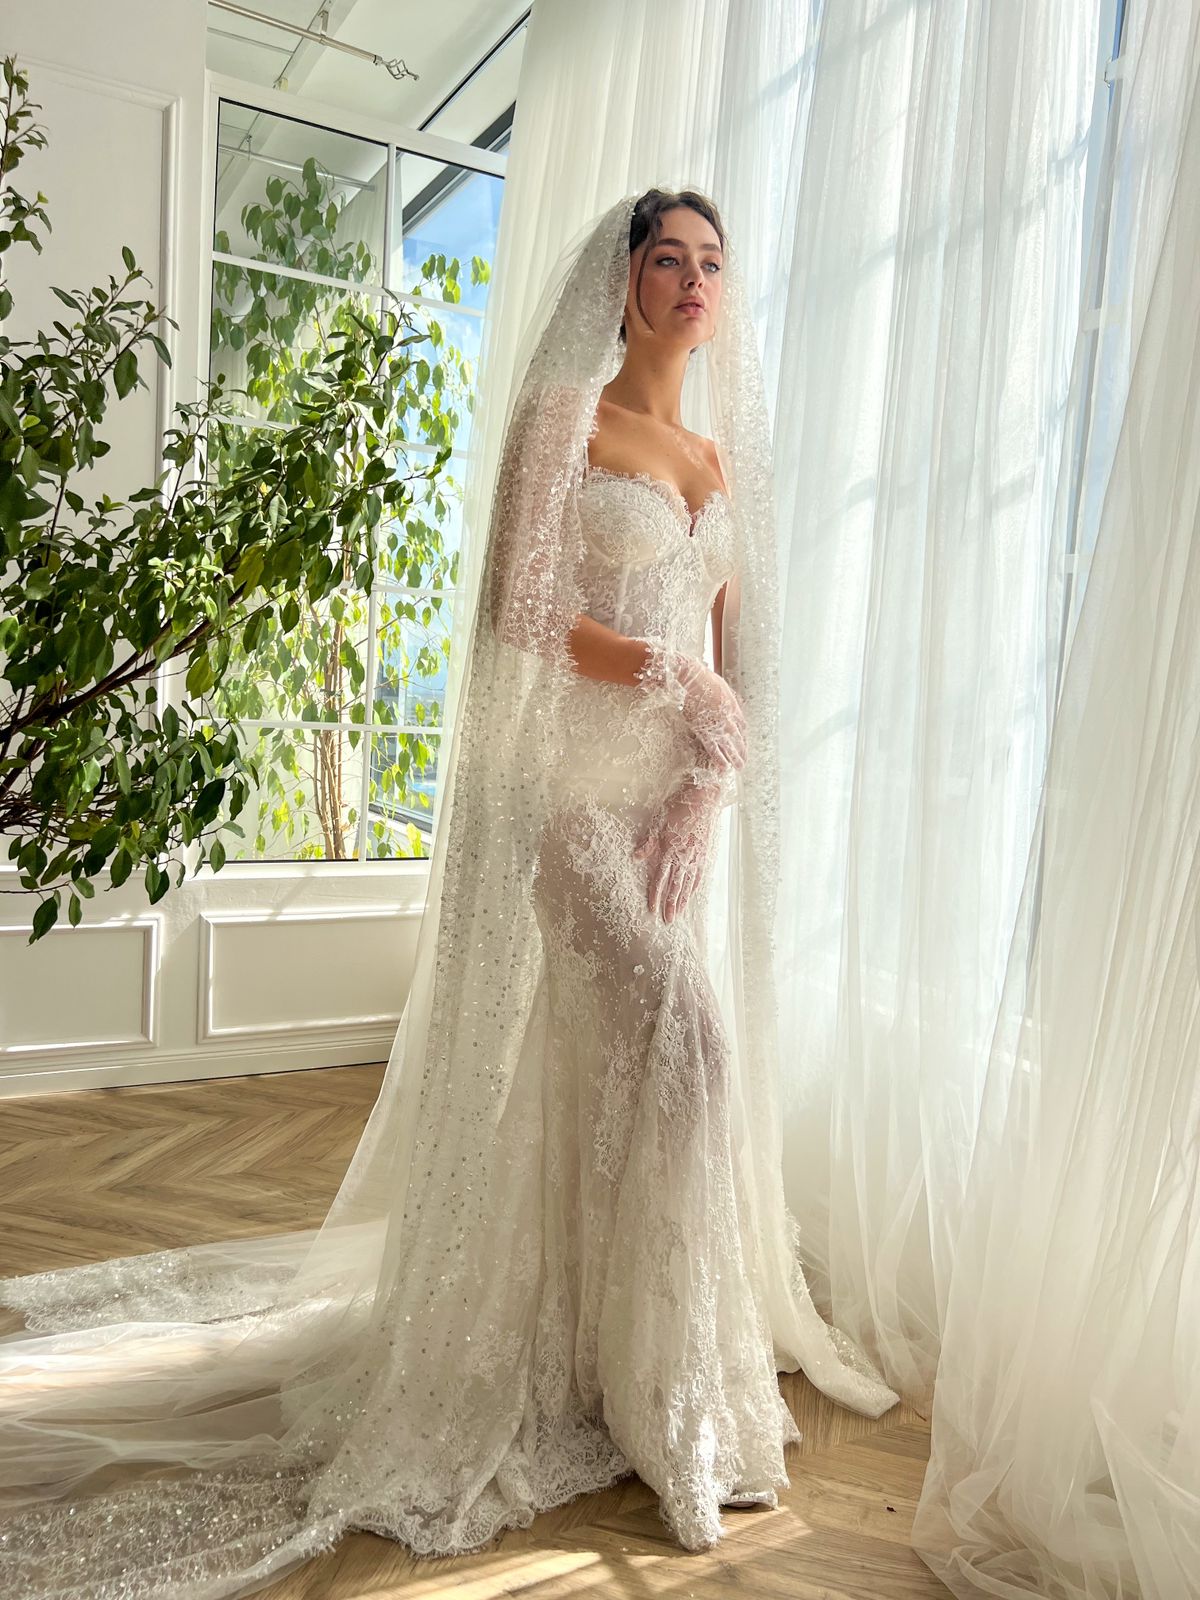 White mermaid bridal dress with veil, gloves and embroidery